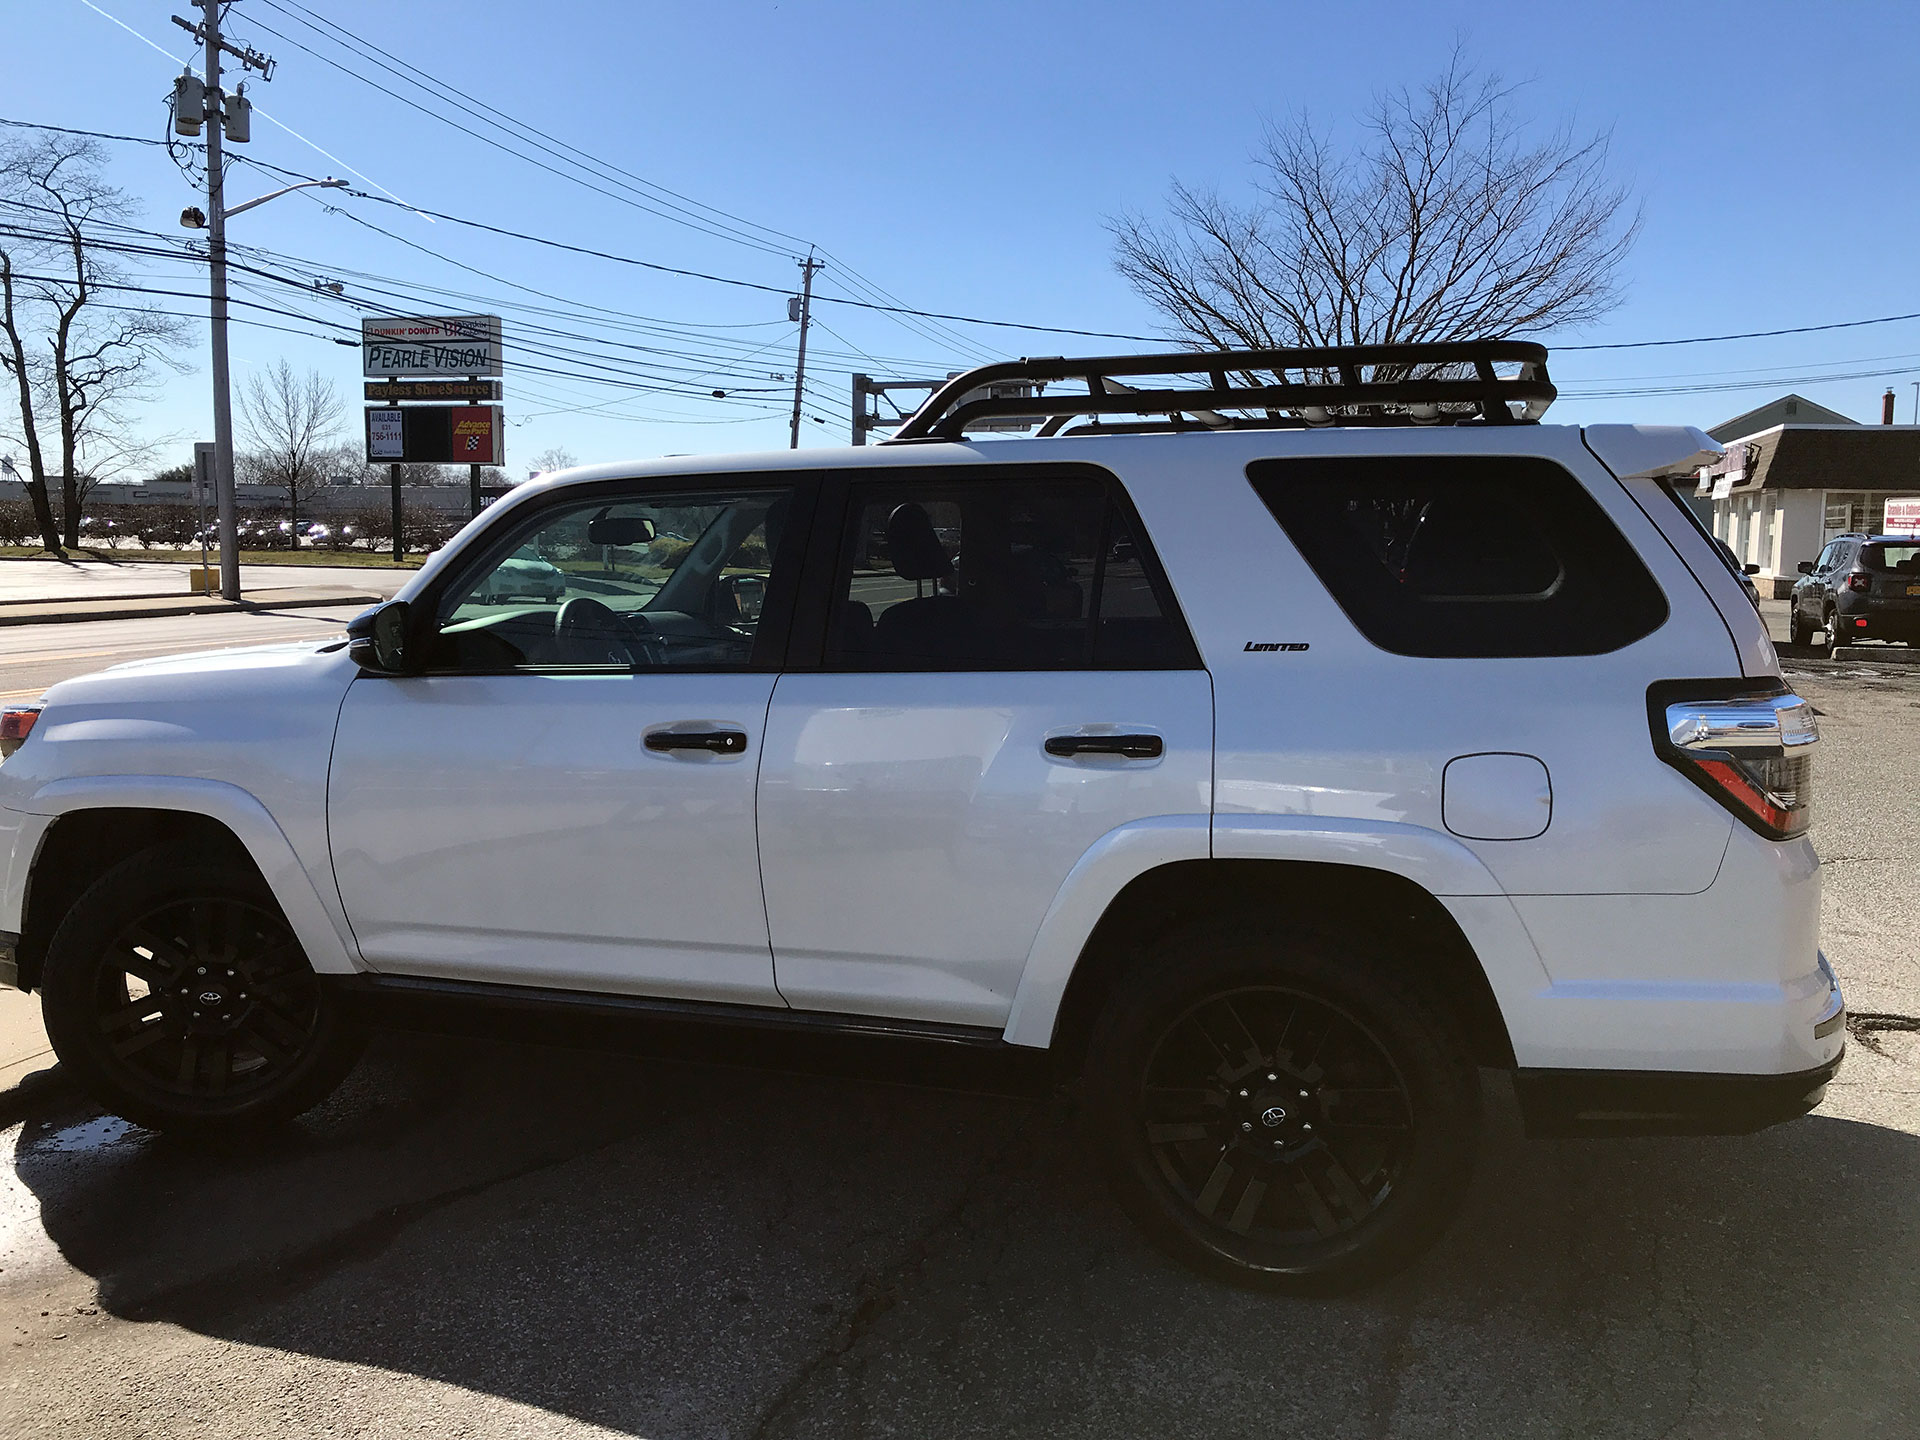 2020 4runner Trd Pro Roof Rack Removal Photo | Auto Confidence Game 2020 Toyota 4runner Trd Pro Roof Rack